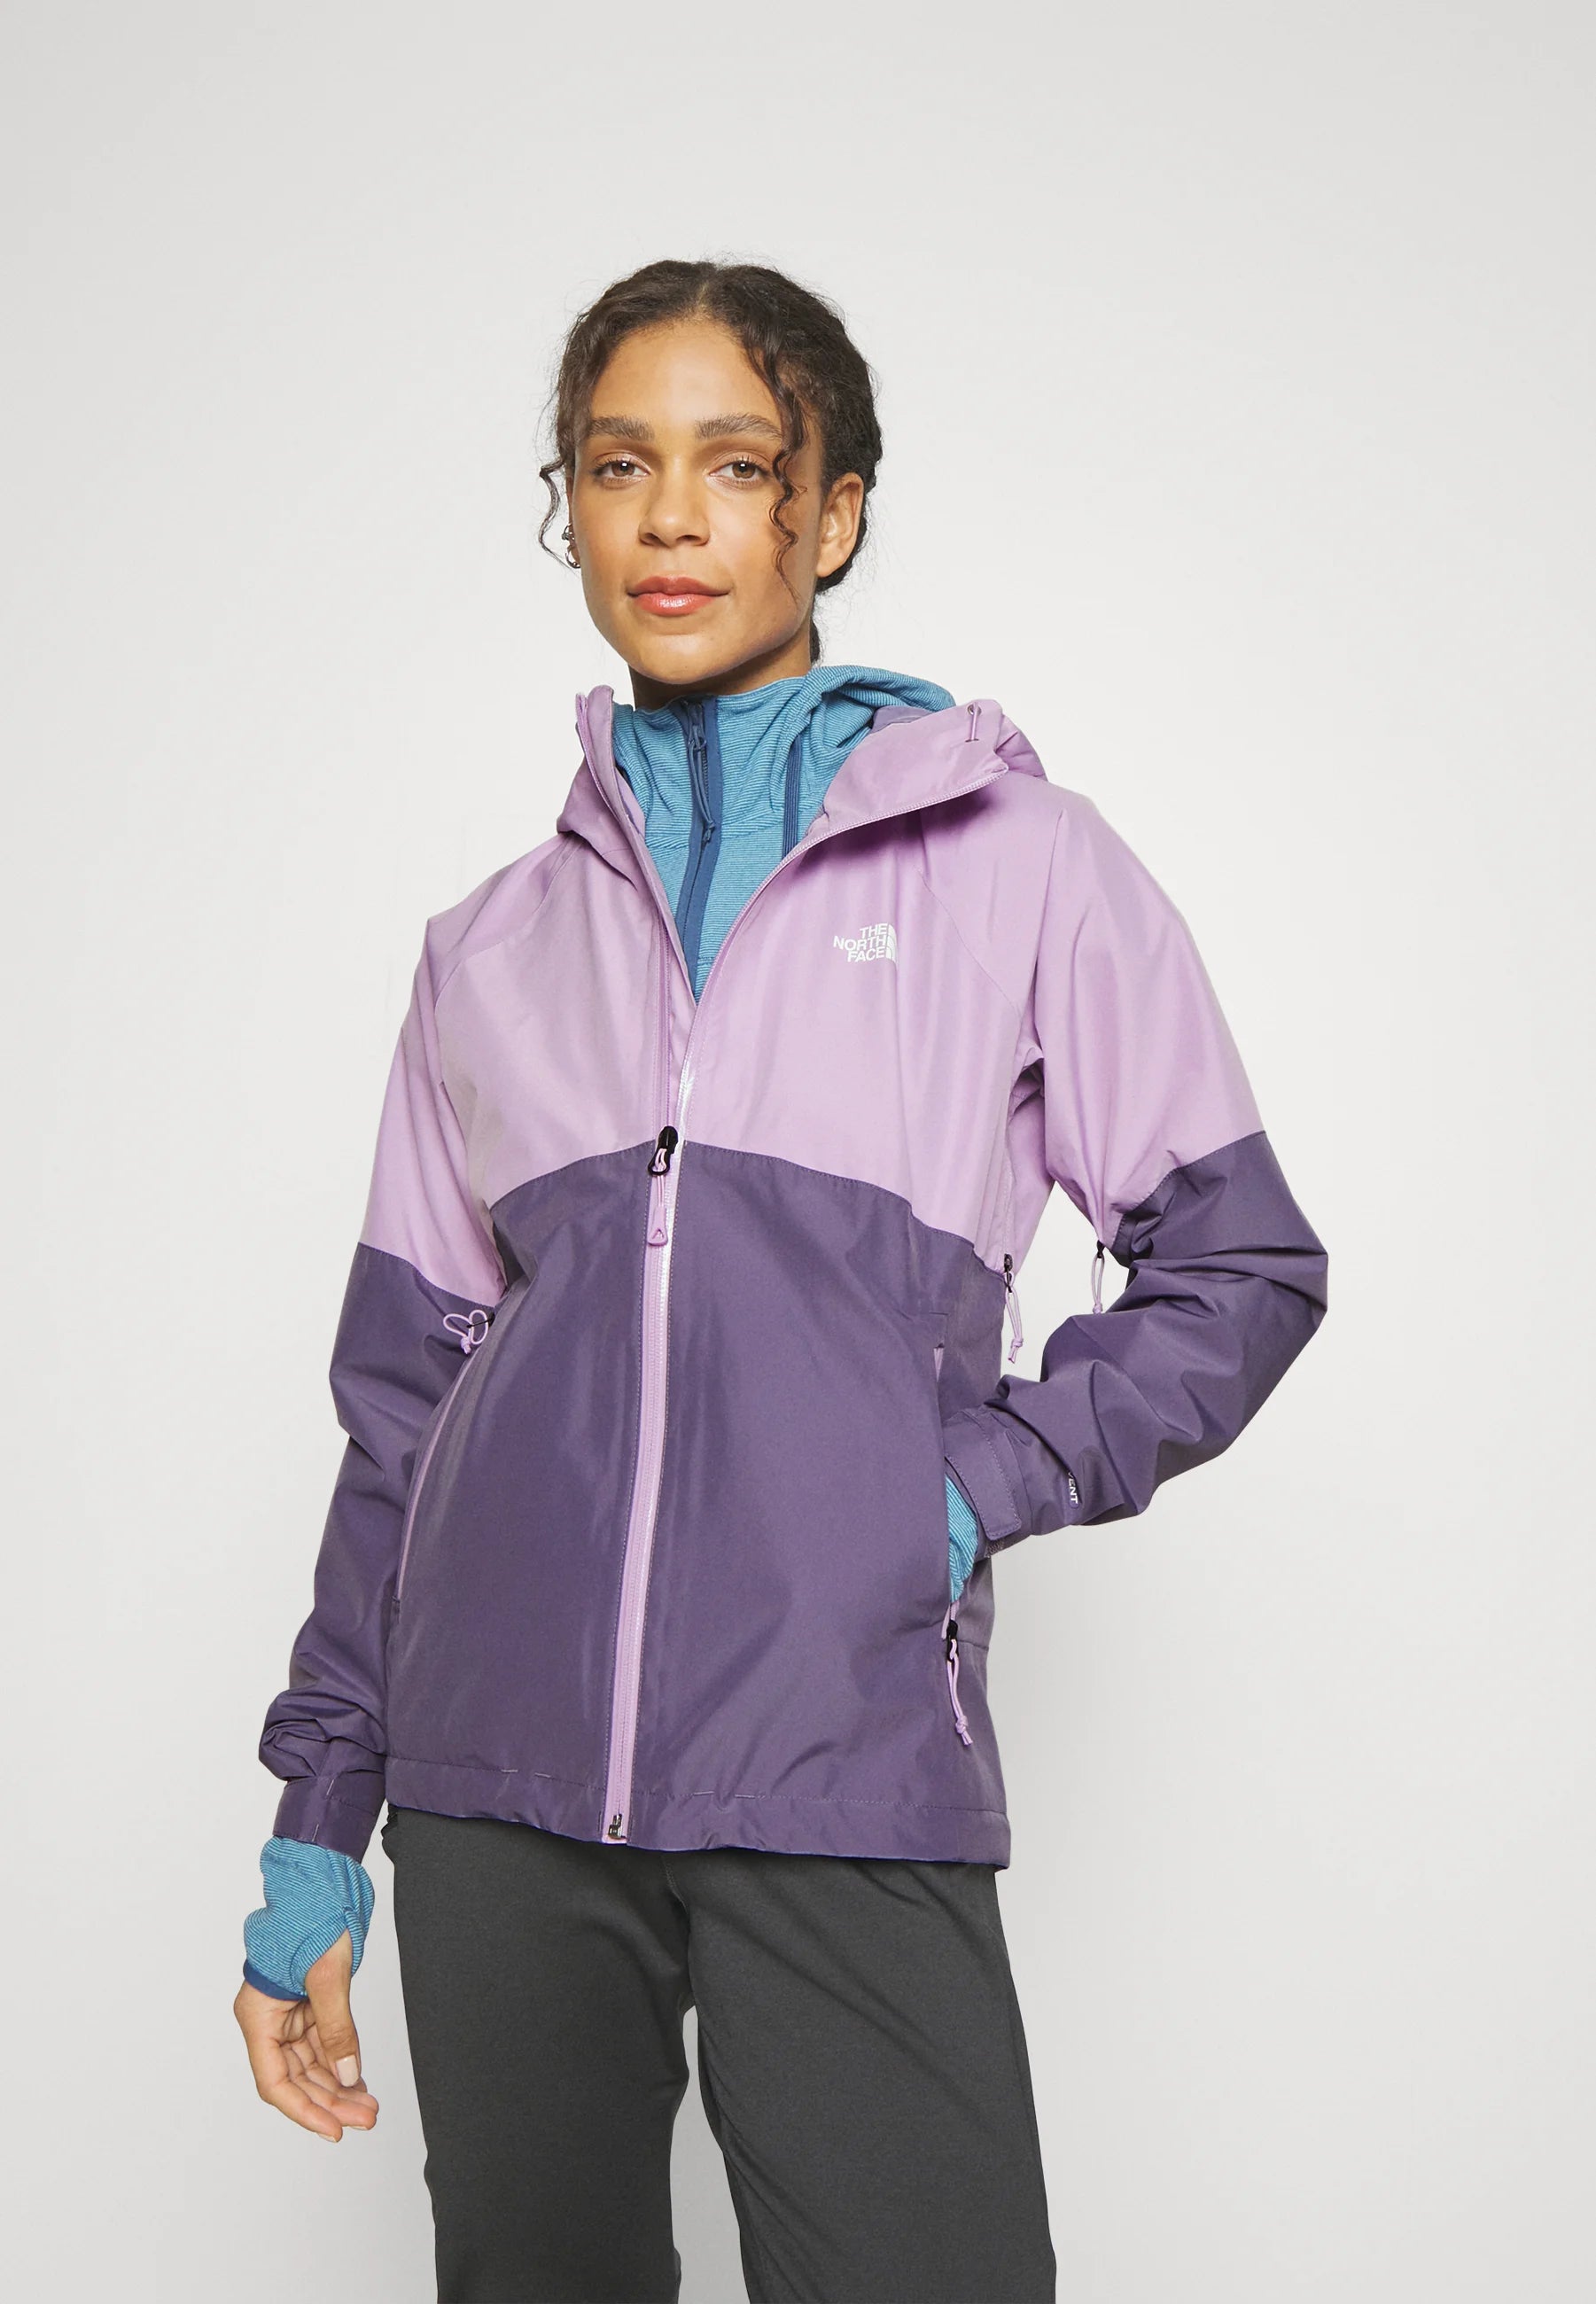 The North Face Womens Diablo Dynamic Jacket